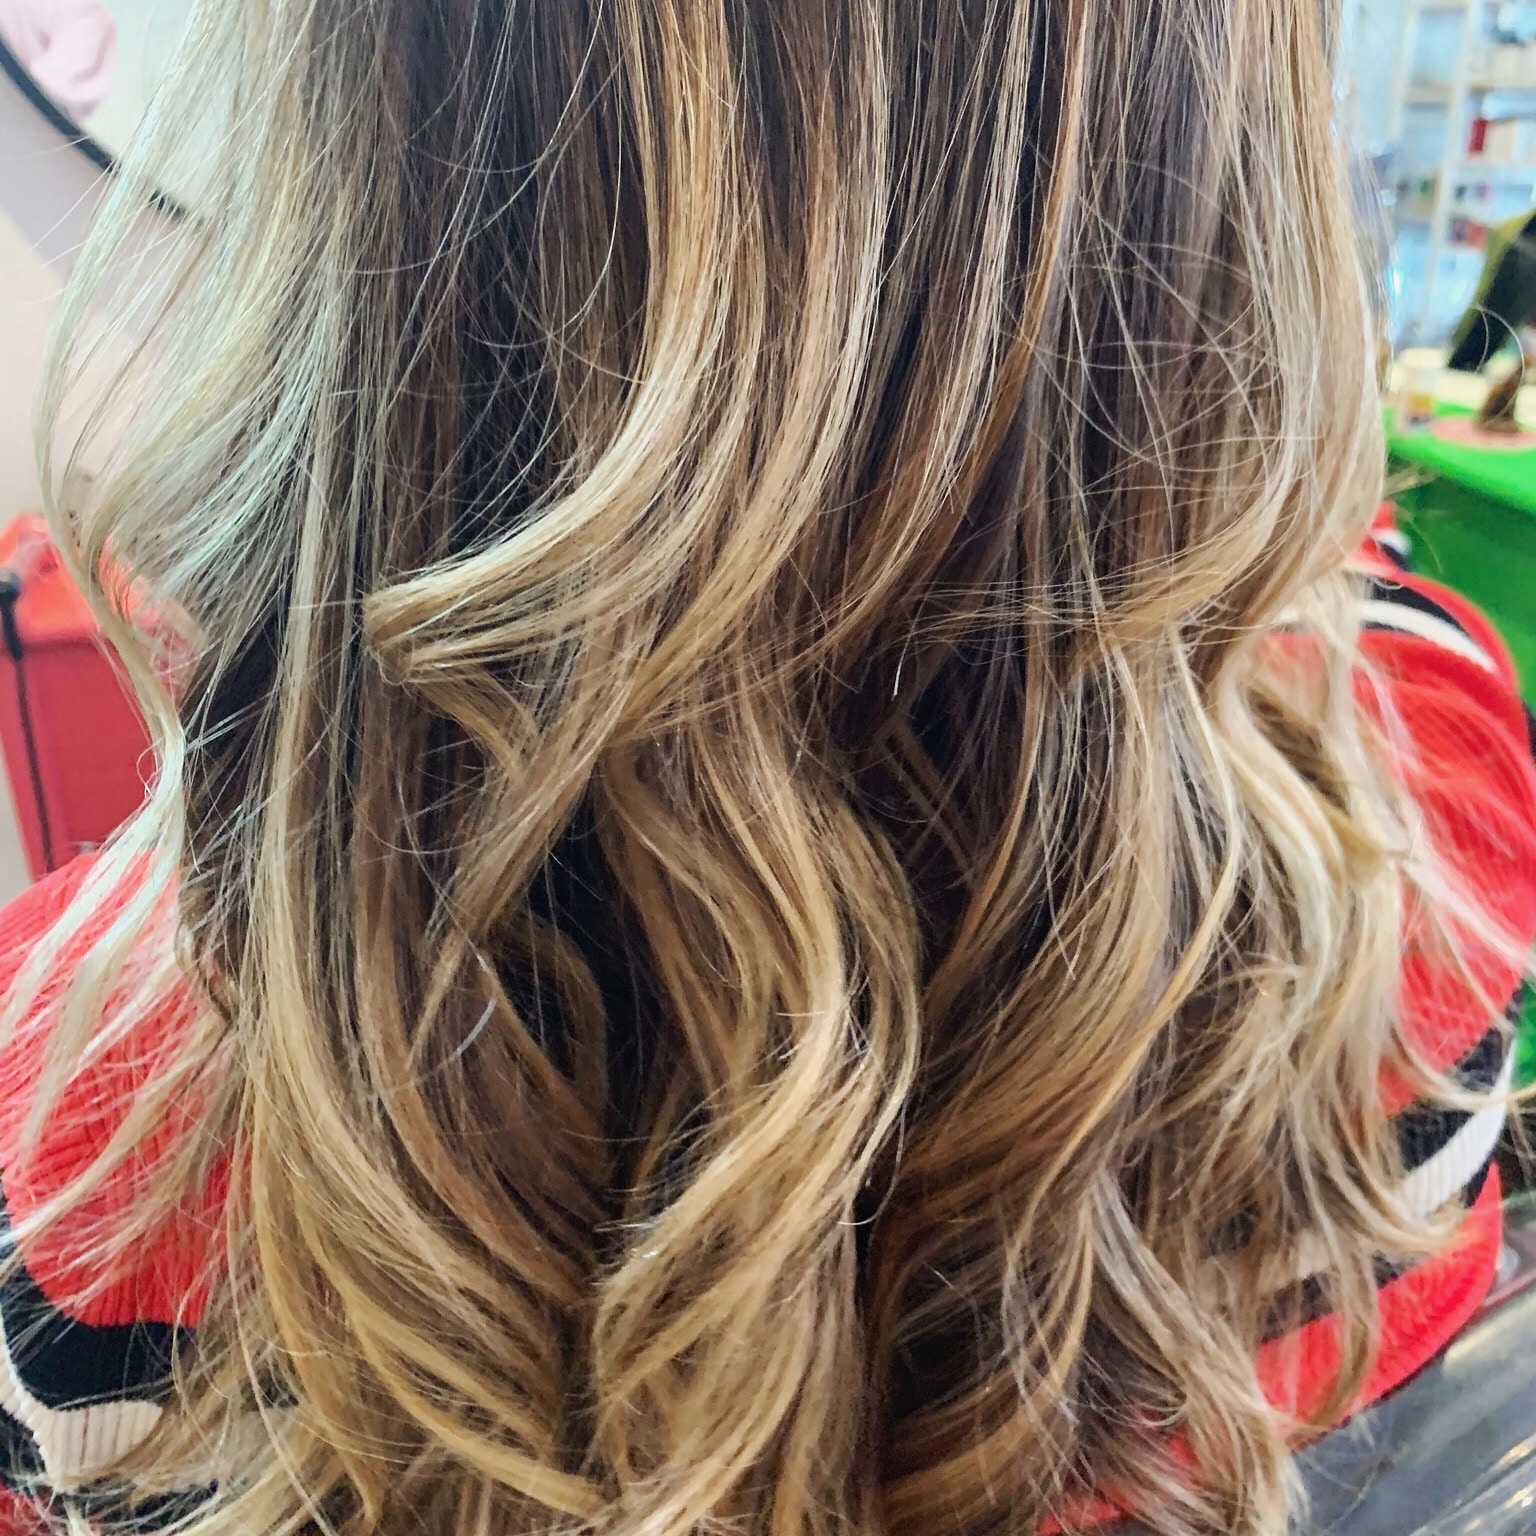 9 Affordable + Chic Hair Salons in Jersey City - Hoboken Girl